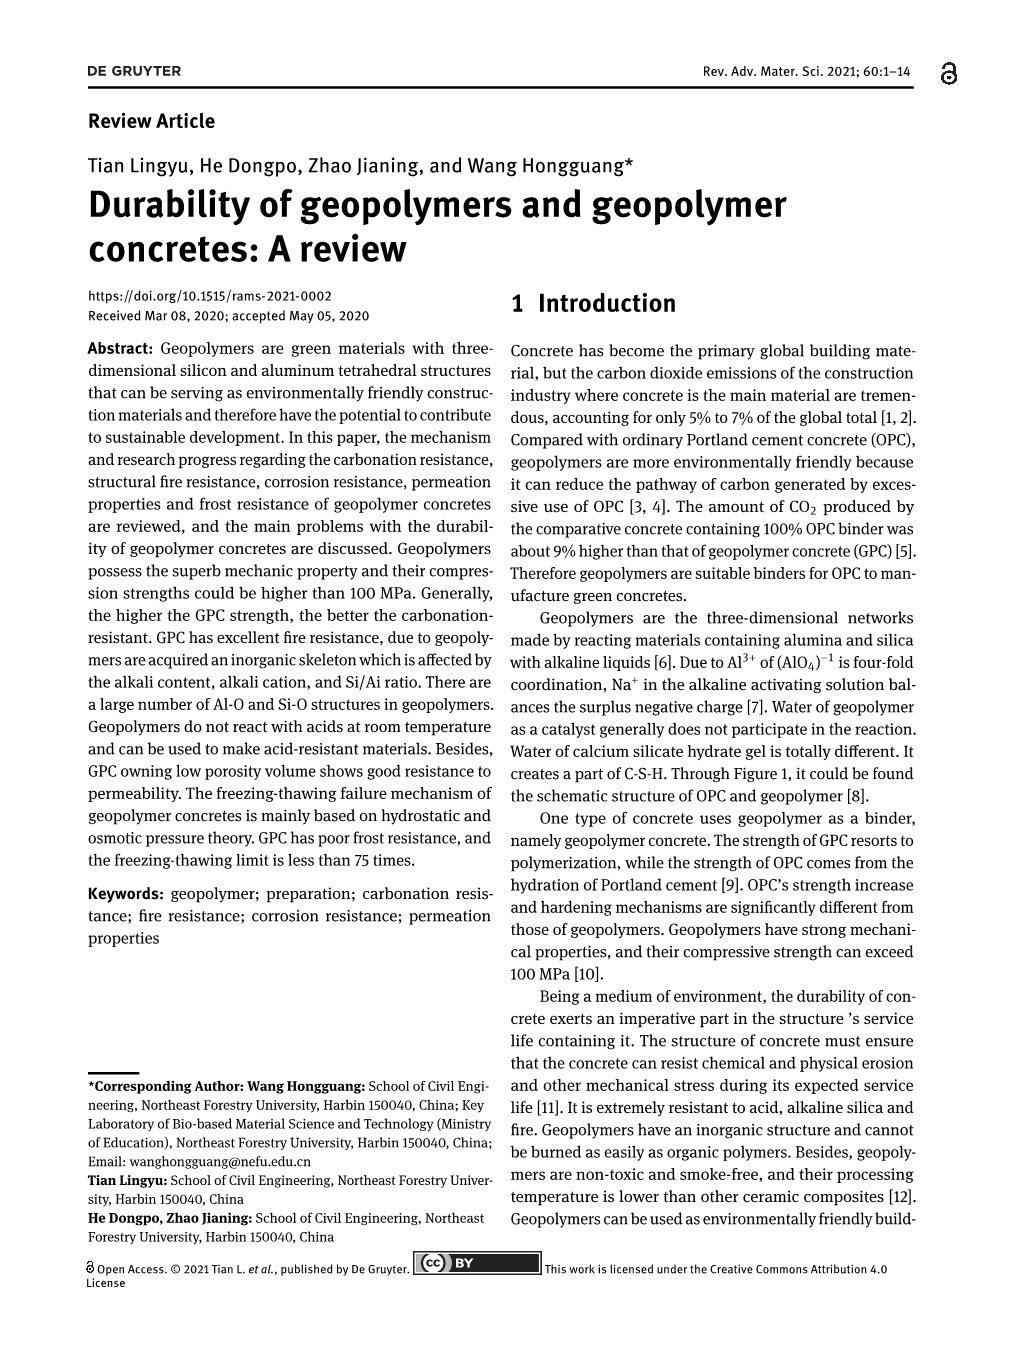 Durability of Geopolymers and Geopolymer Concretes: a Review 1 Introduction Received Mar 08, 2020; Accepted May 05, 2020